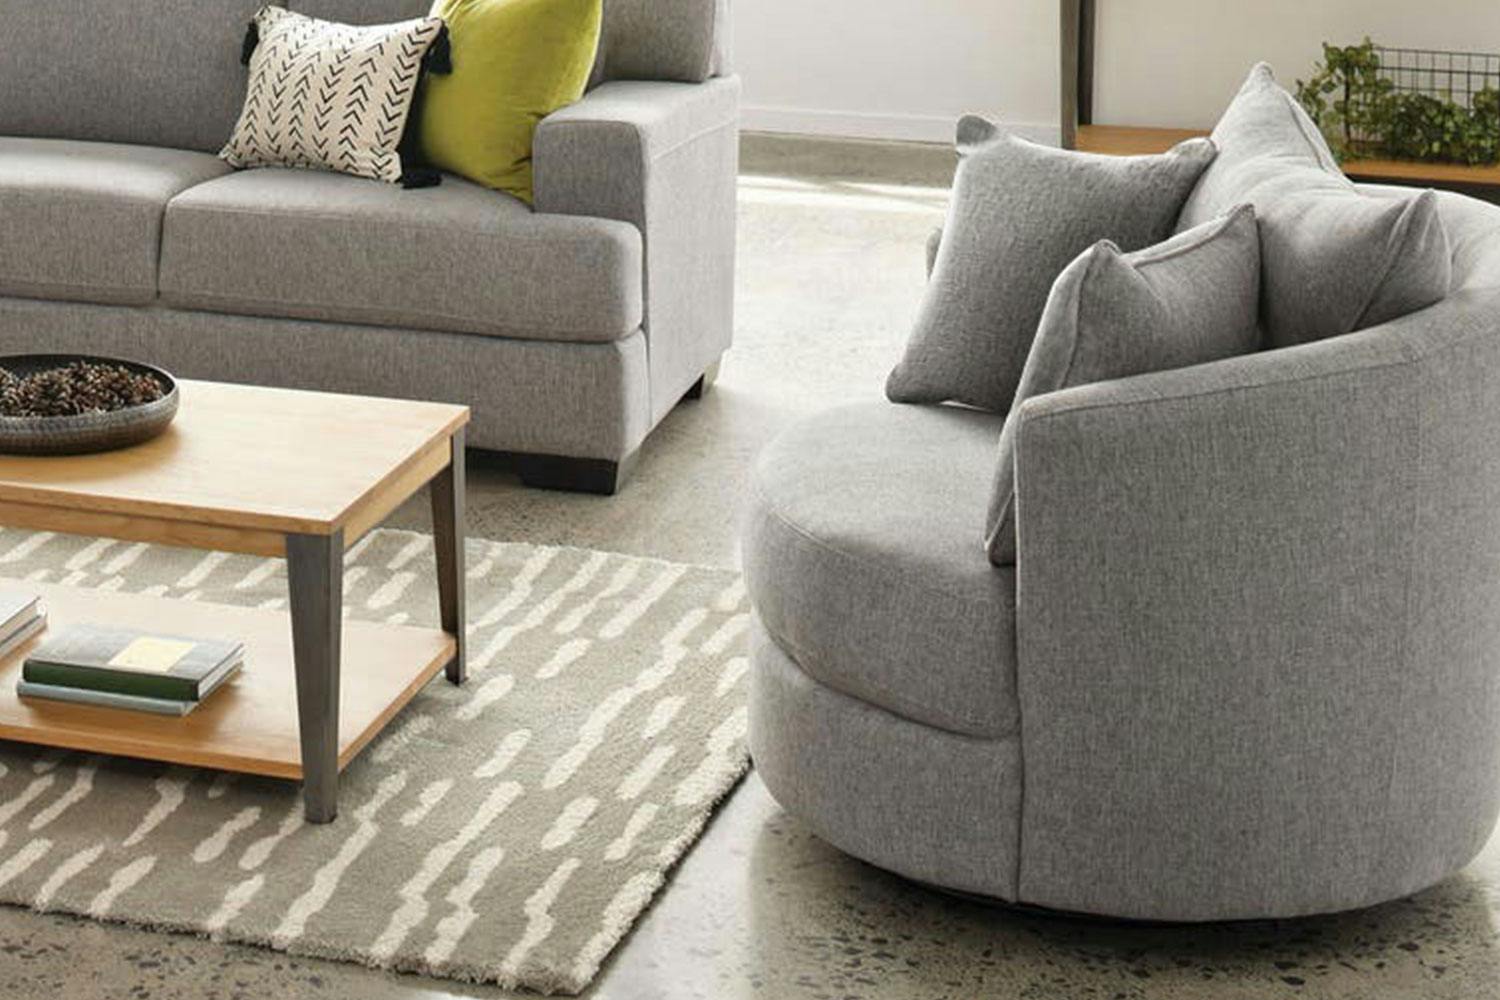 Lounge Chairs For Living Room Nz